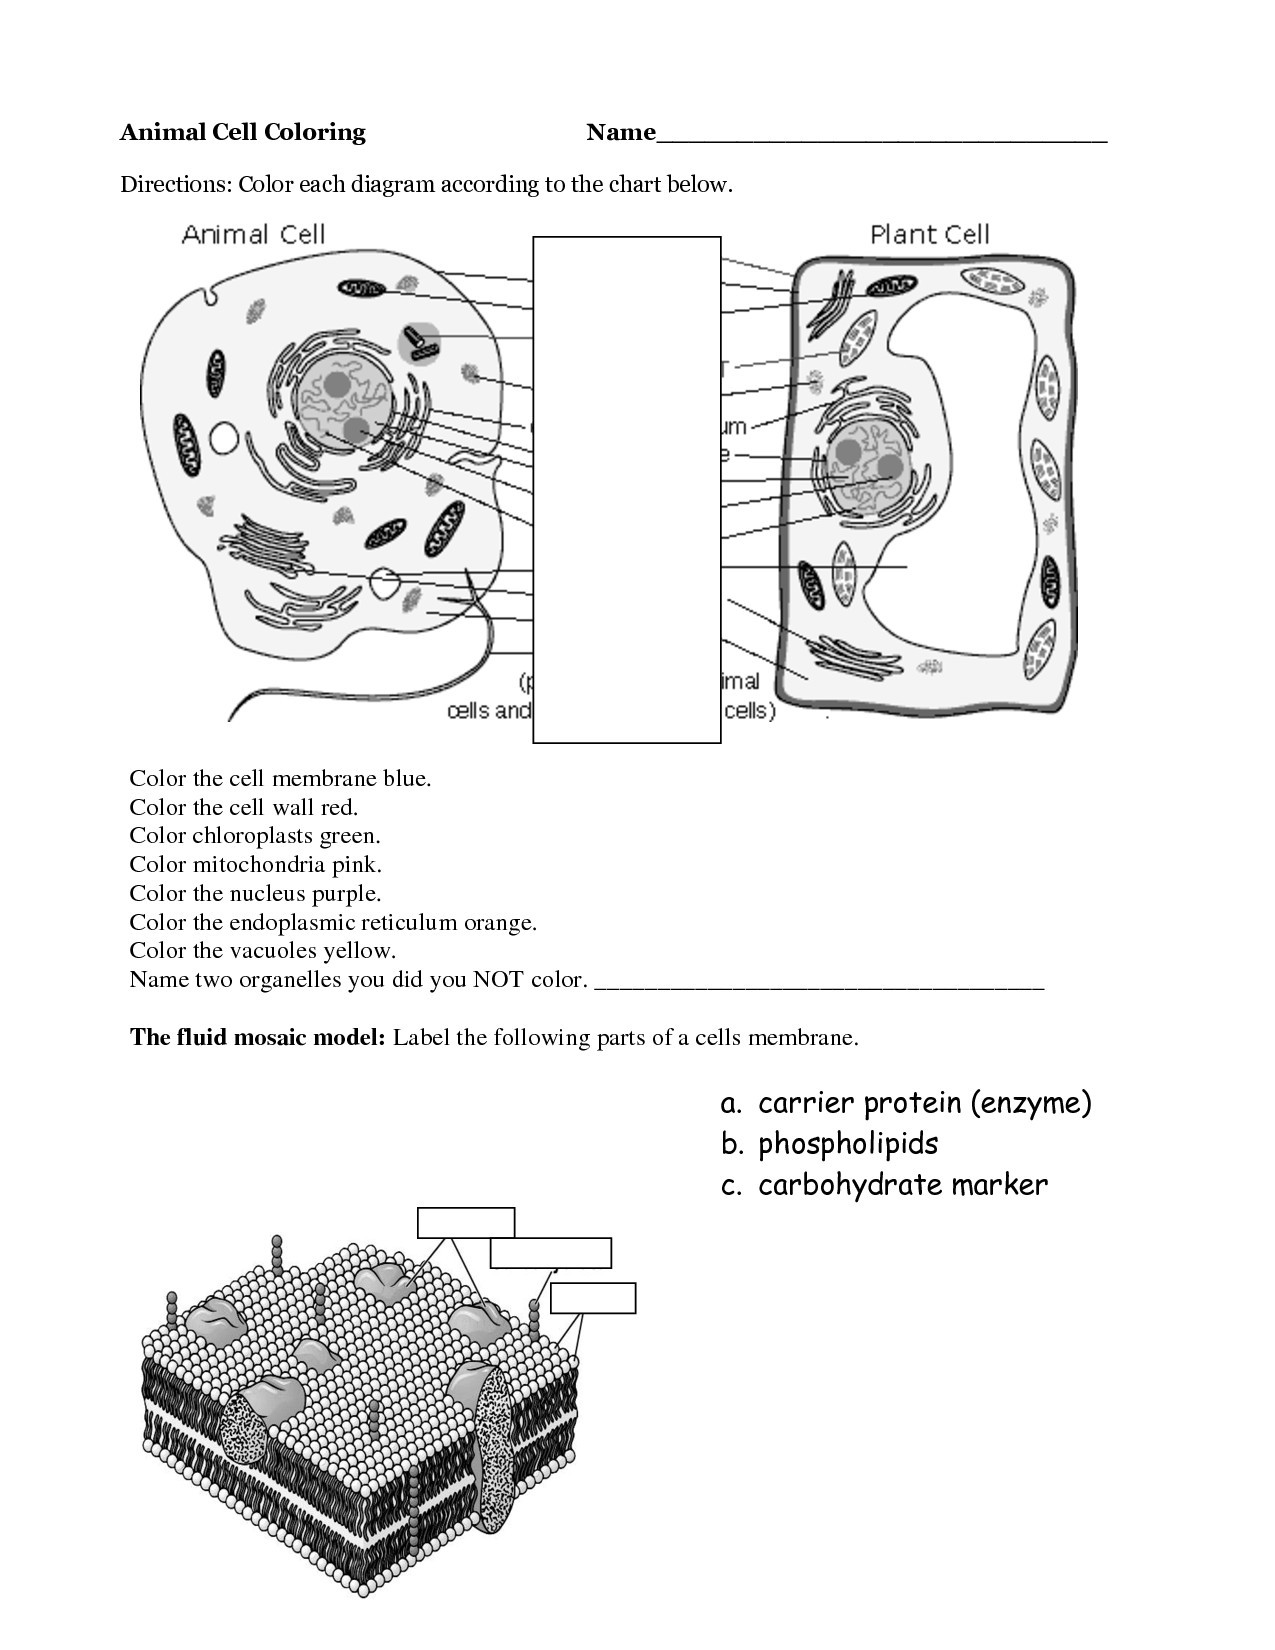 Animal Cell Coloring Worksheet Rc 9008] Detailed Color Diagram A Plant Cell Free Diagram